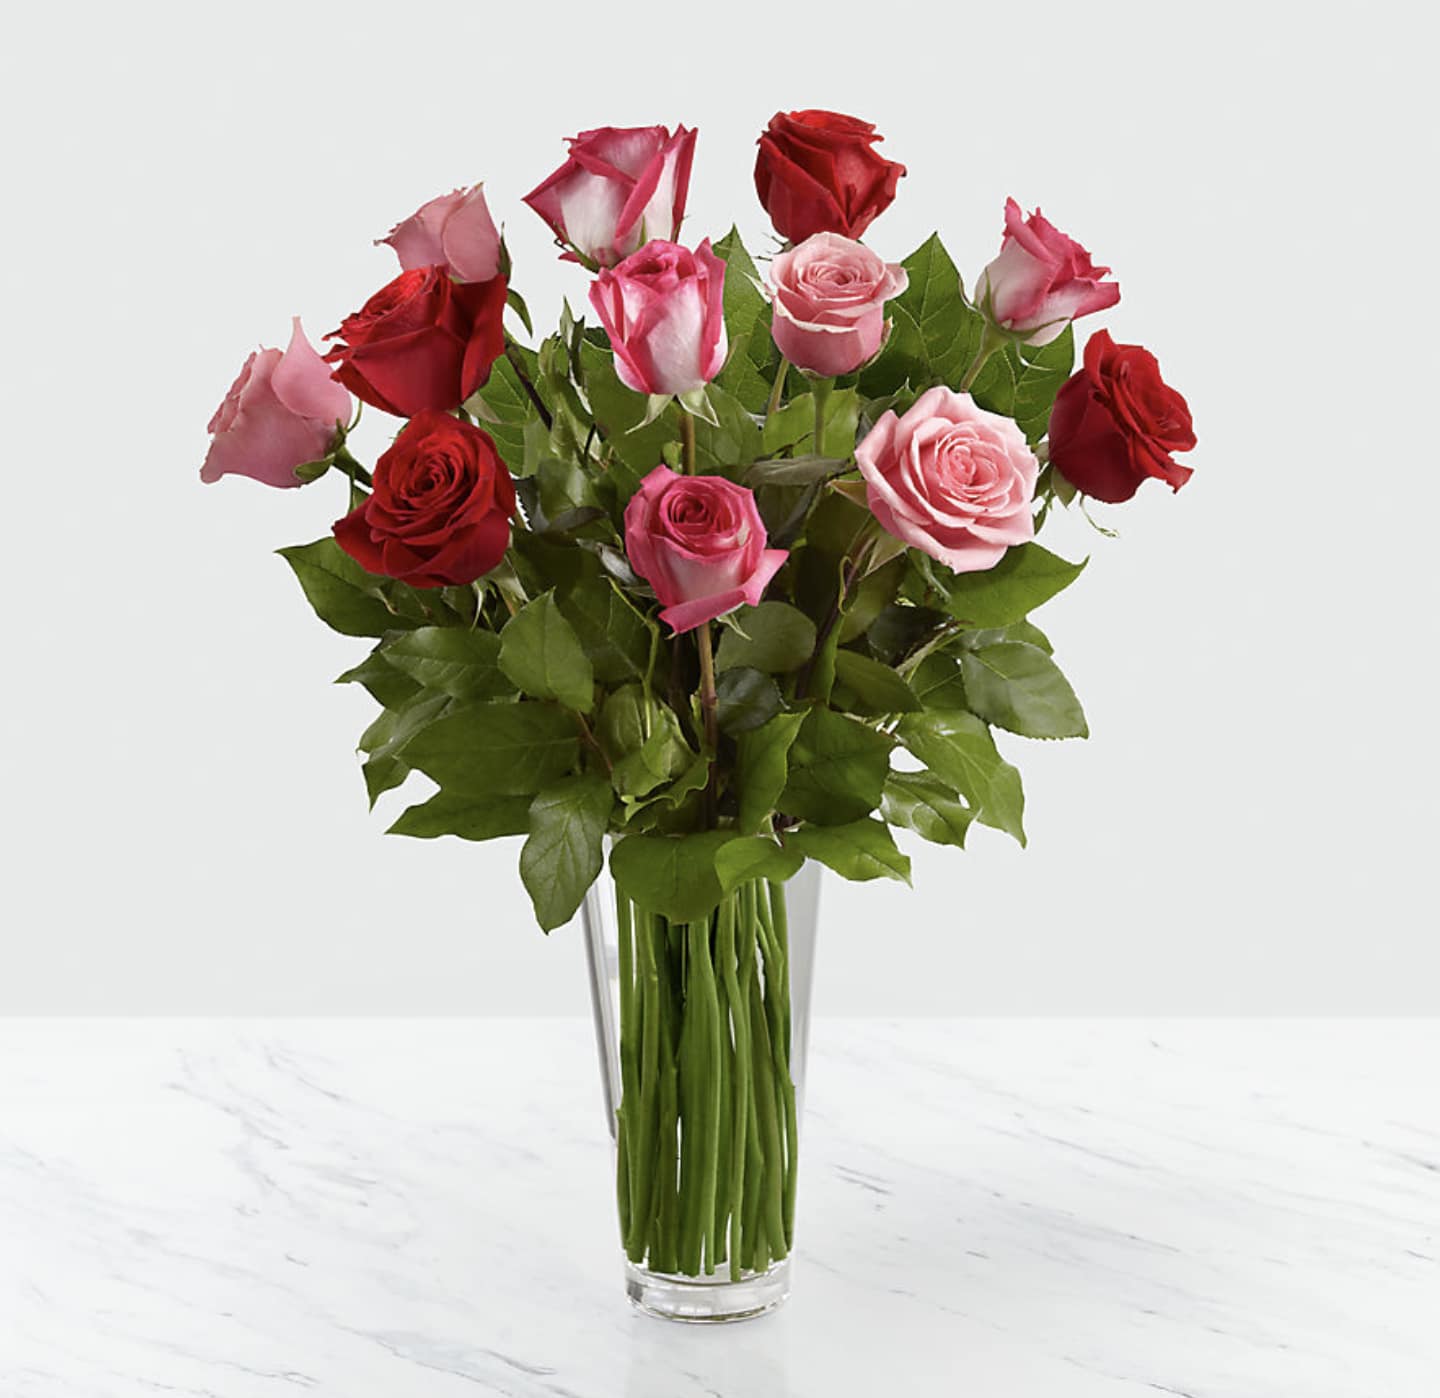 The True Romance Rose Bouquet - The True Romance Rose Bouquet is the perfect expression of love and passion. A bright burst of color, this bouquet combines red, pink and fuchsia roses, accented with beautiful greens and seated in a clear glass vase, to create a truly romantic representation of your love.